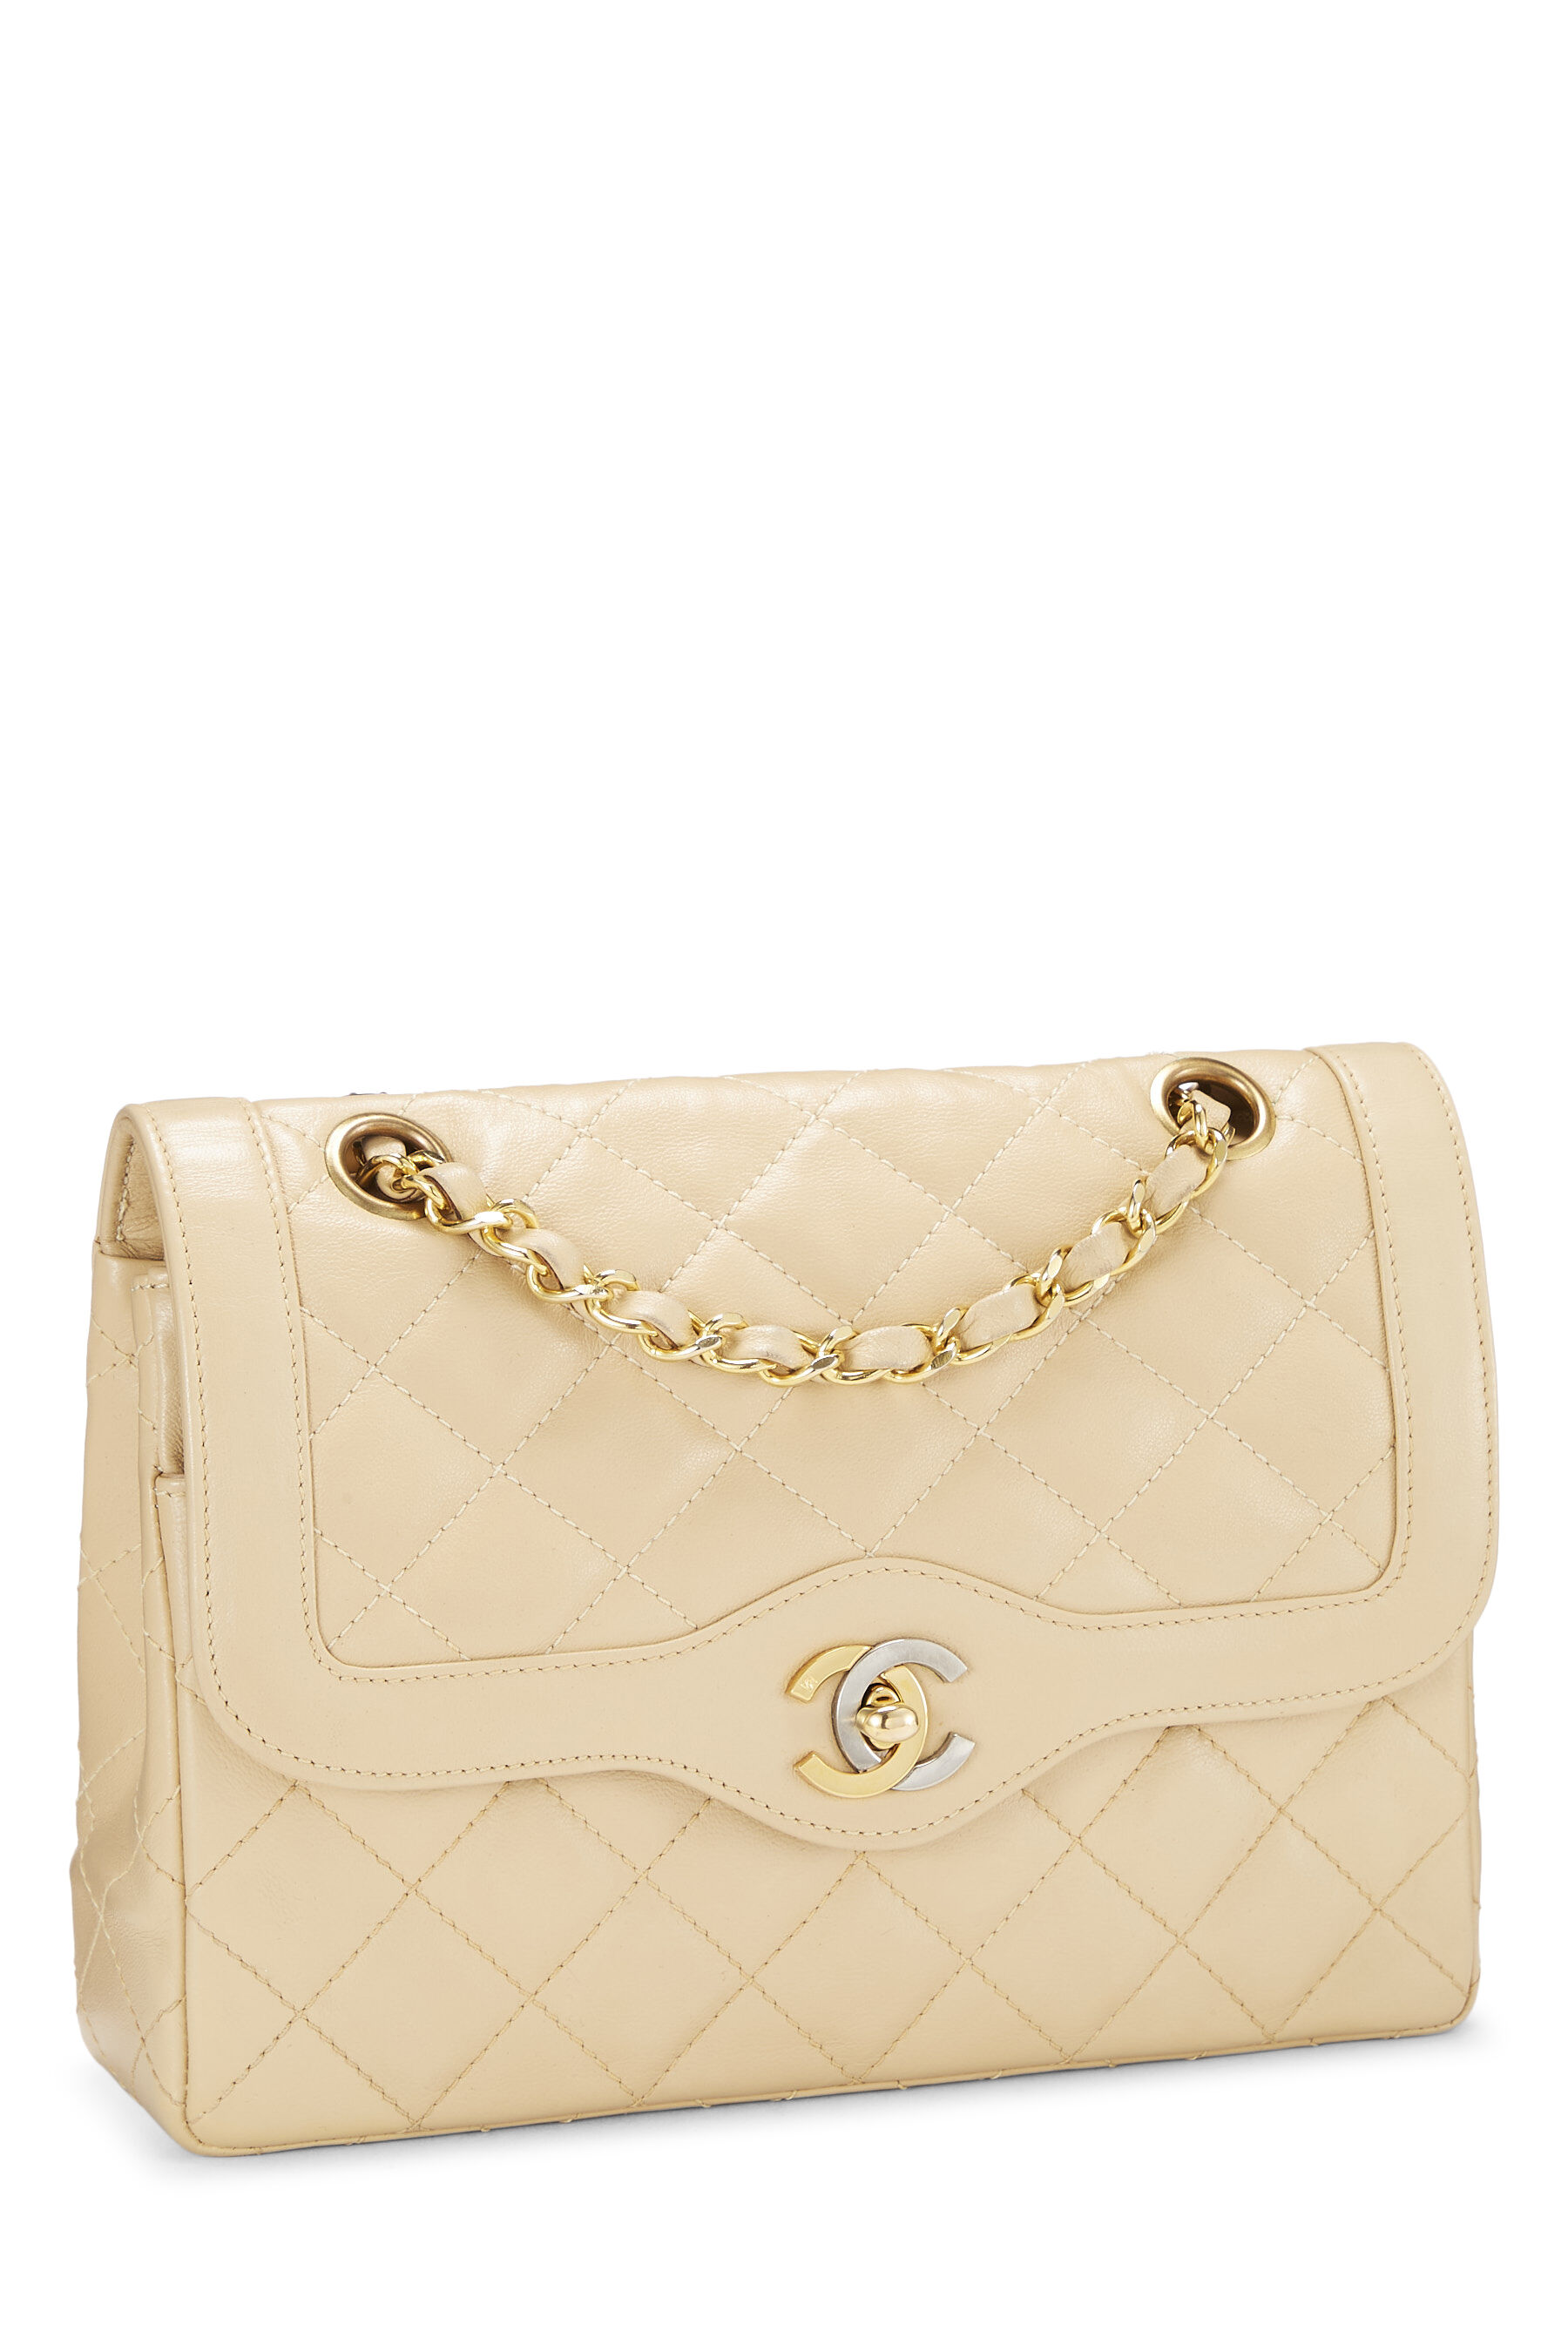 Chanel - Beige Quilted Lambskin Paris Limited Double Flap Small